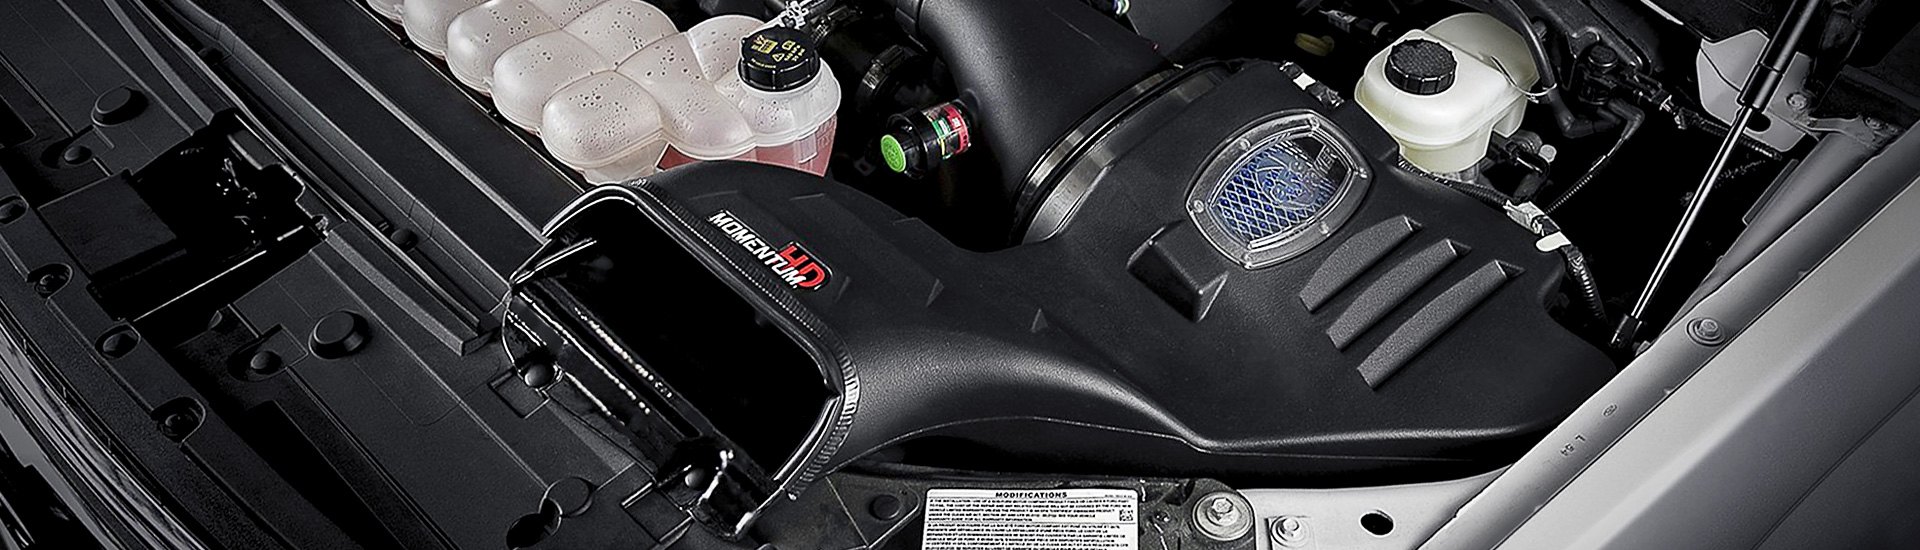 Accelerate Faster in Your F-150 With Brand-New Momentum HD Intake By aFe